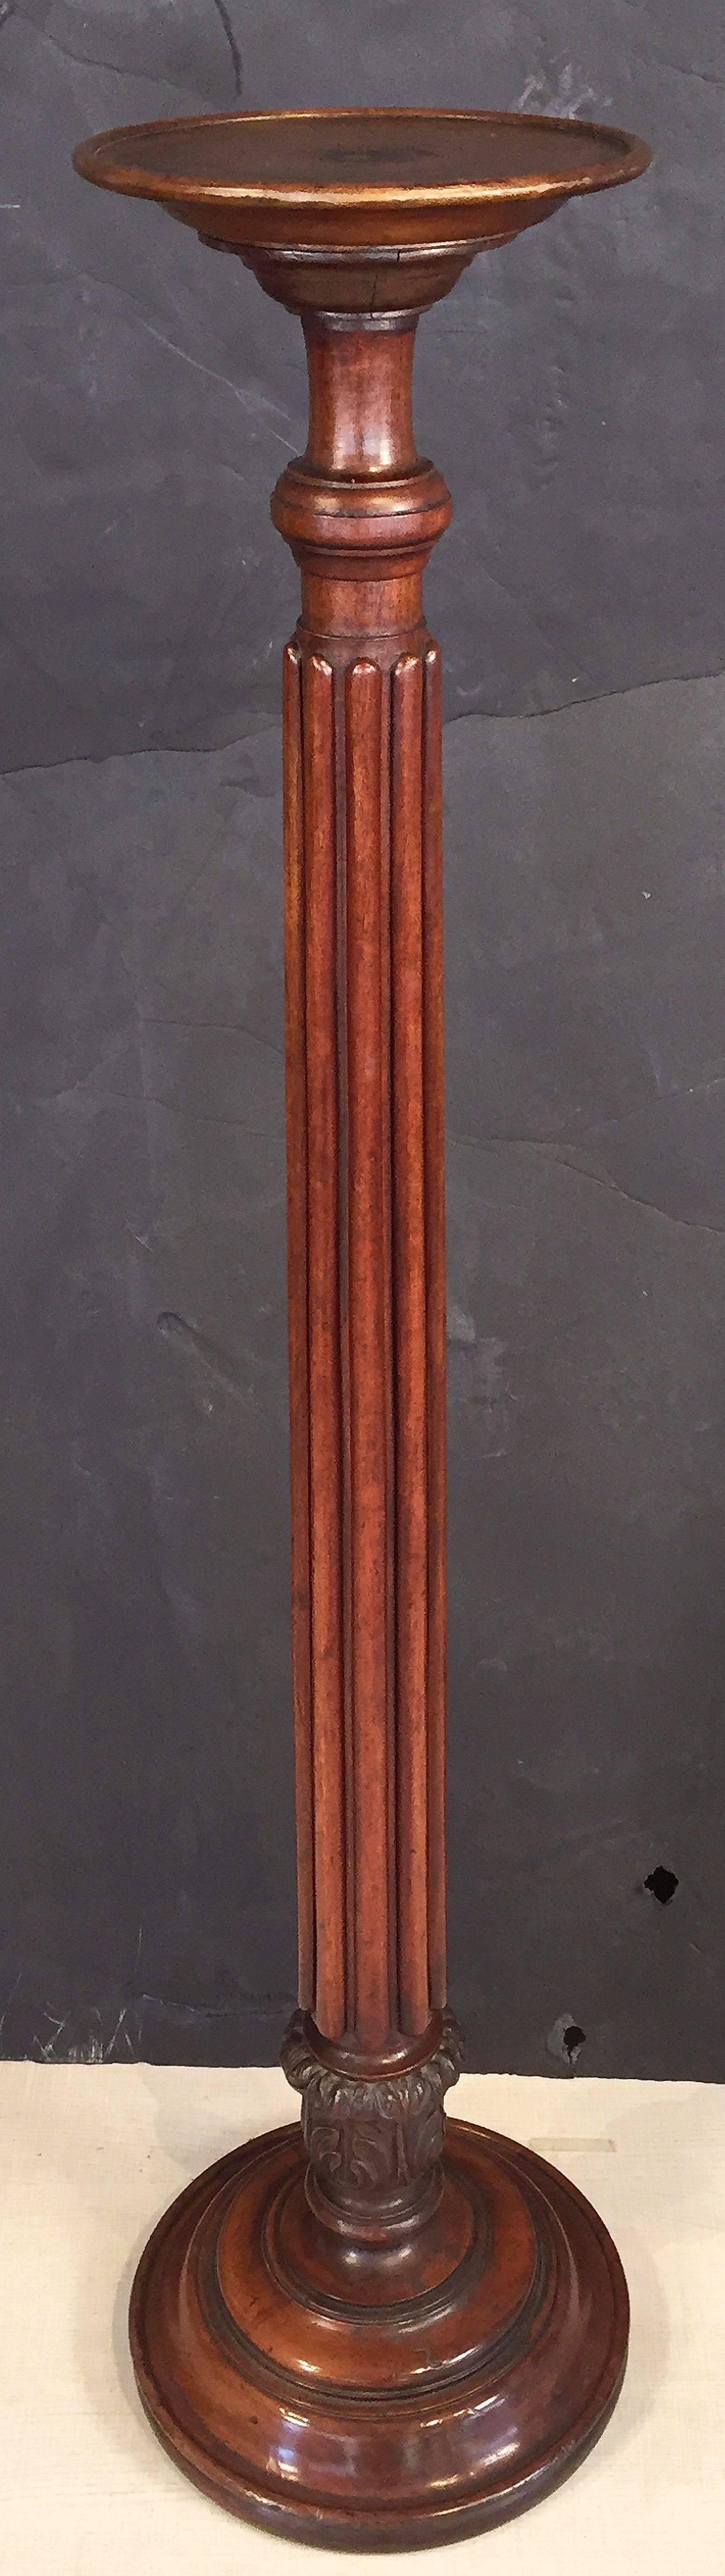 William IV Torchère Pedestal Stand of Turned Mahogany from England (H 57) For Sale